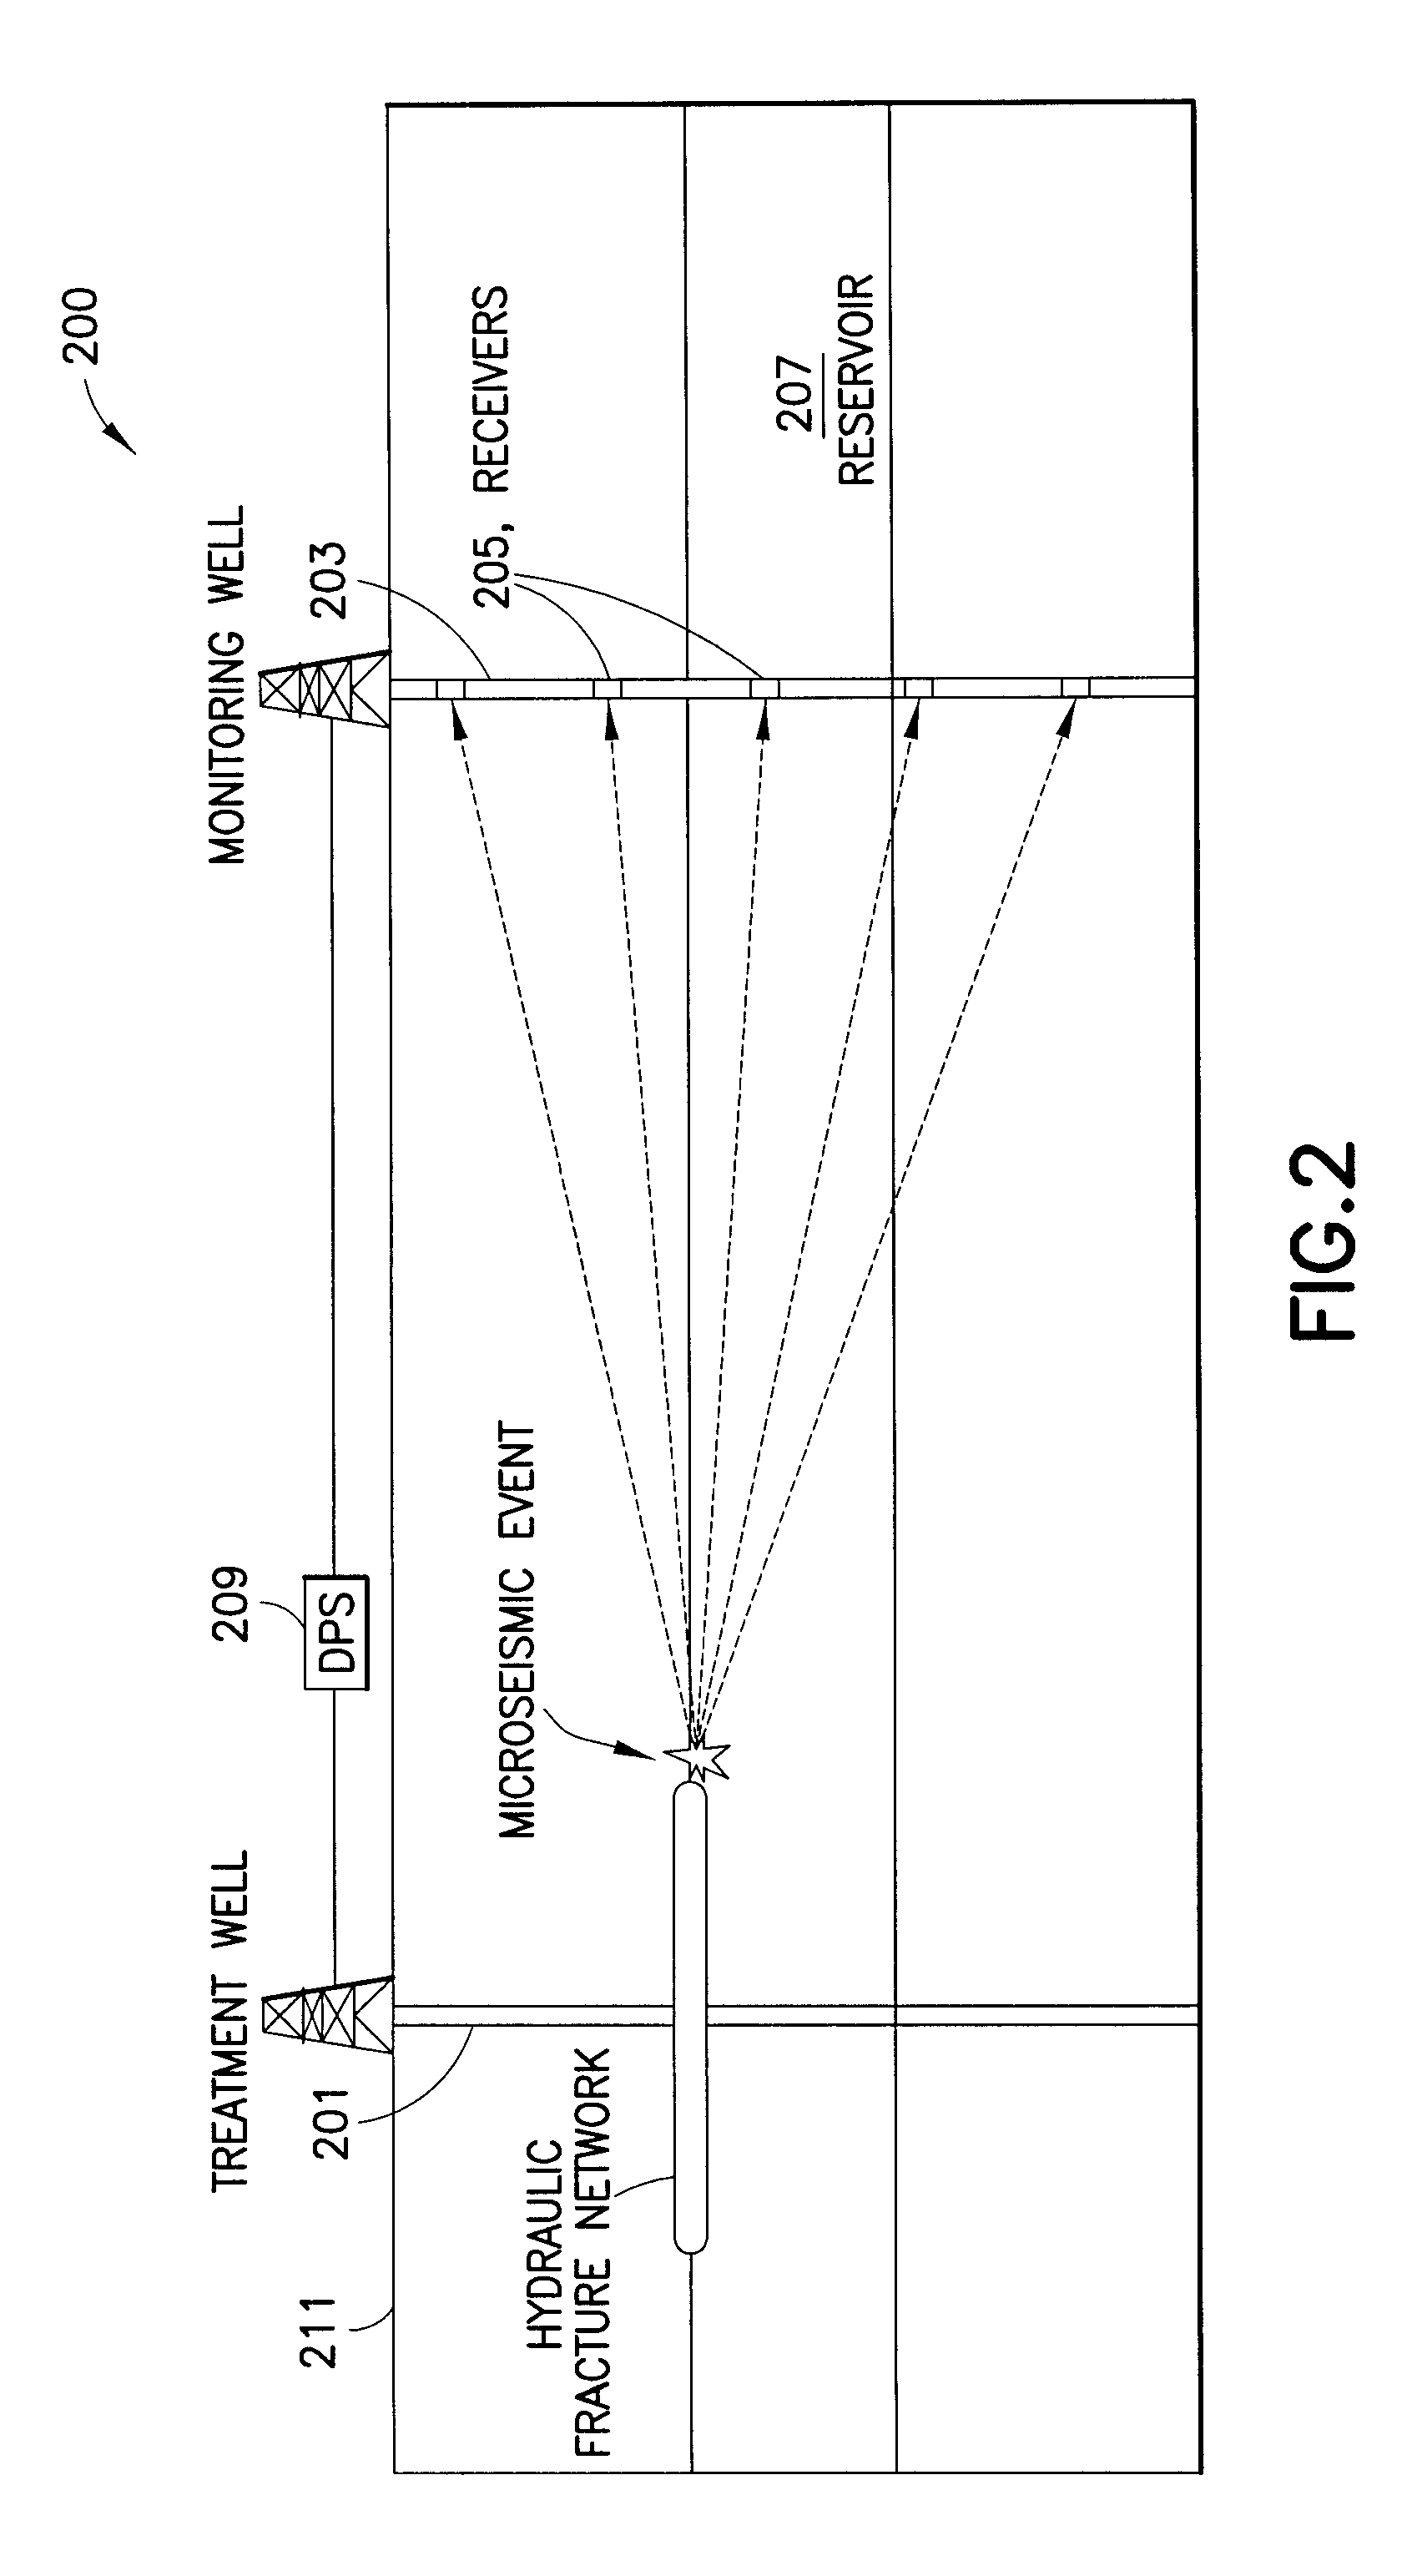 Method and apparatus for efficient real-time characterization of hydraulic fractures and fracturing optimization based thereon